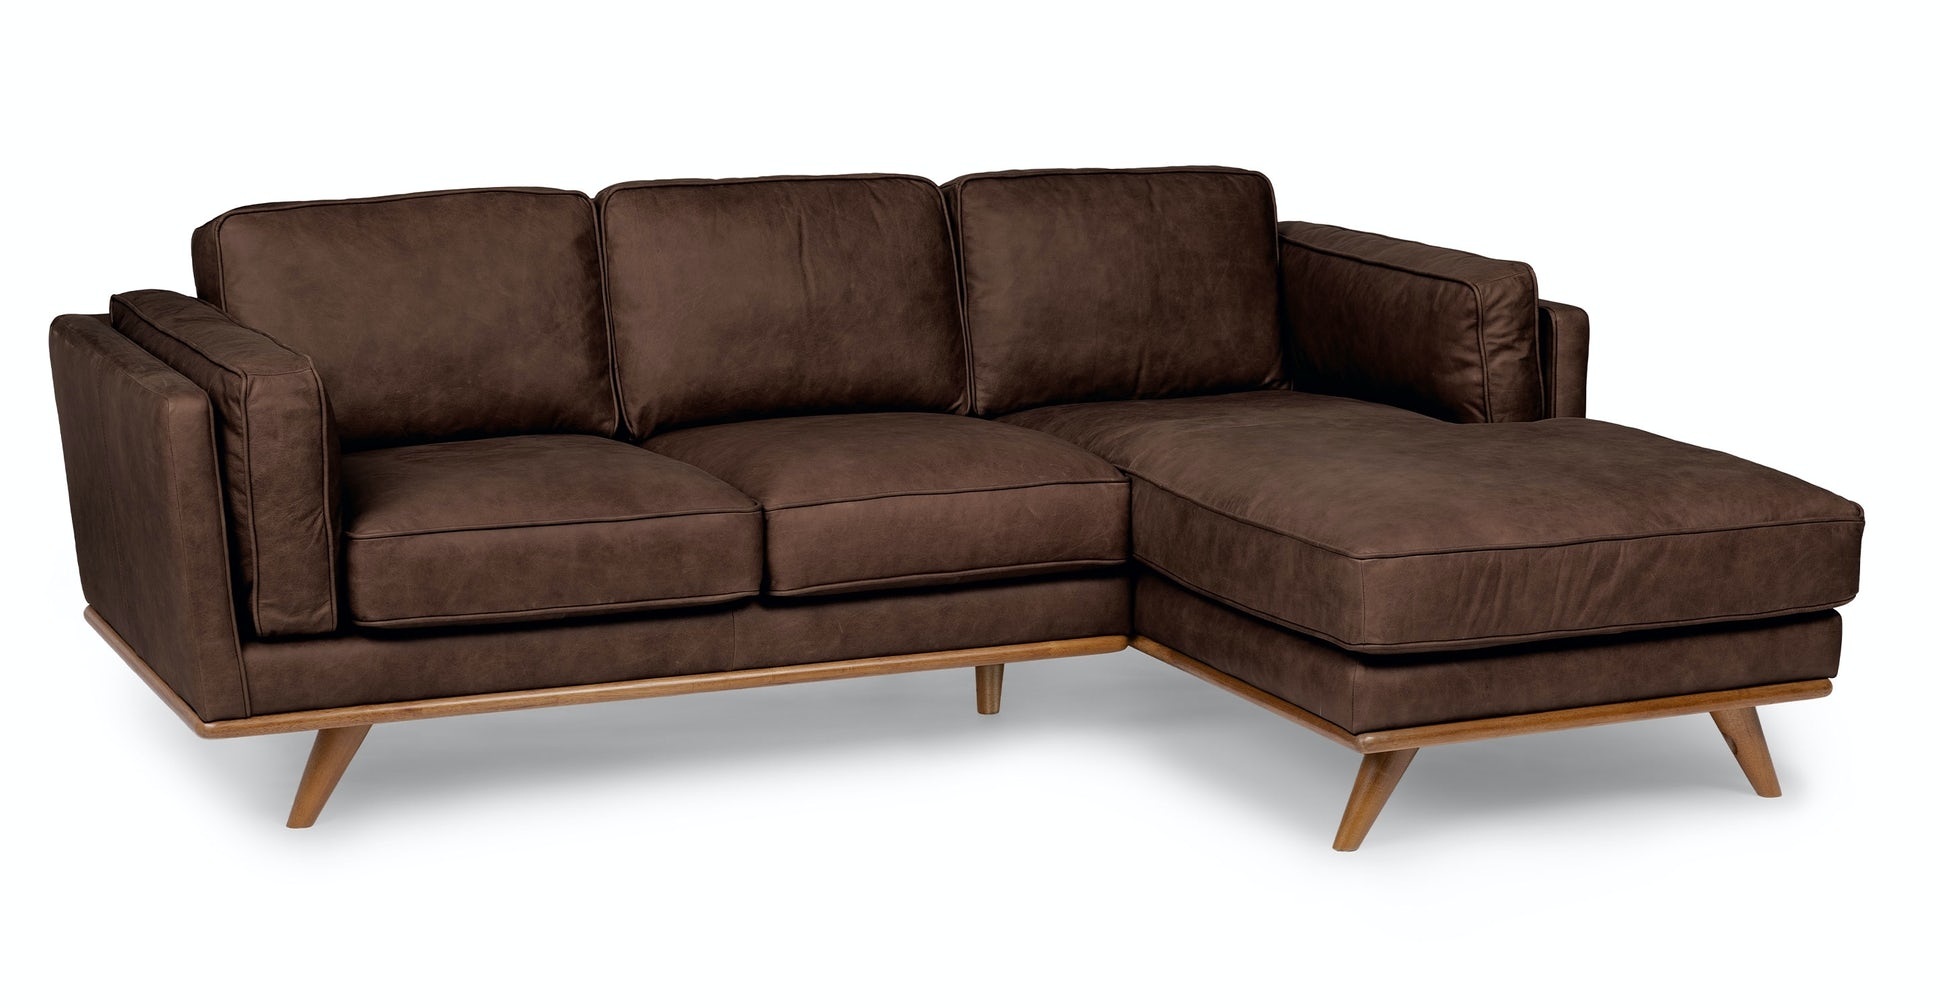 Timber Charme Chocolat Right Sectional - Image 2